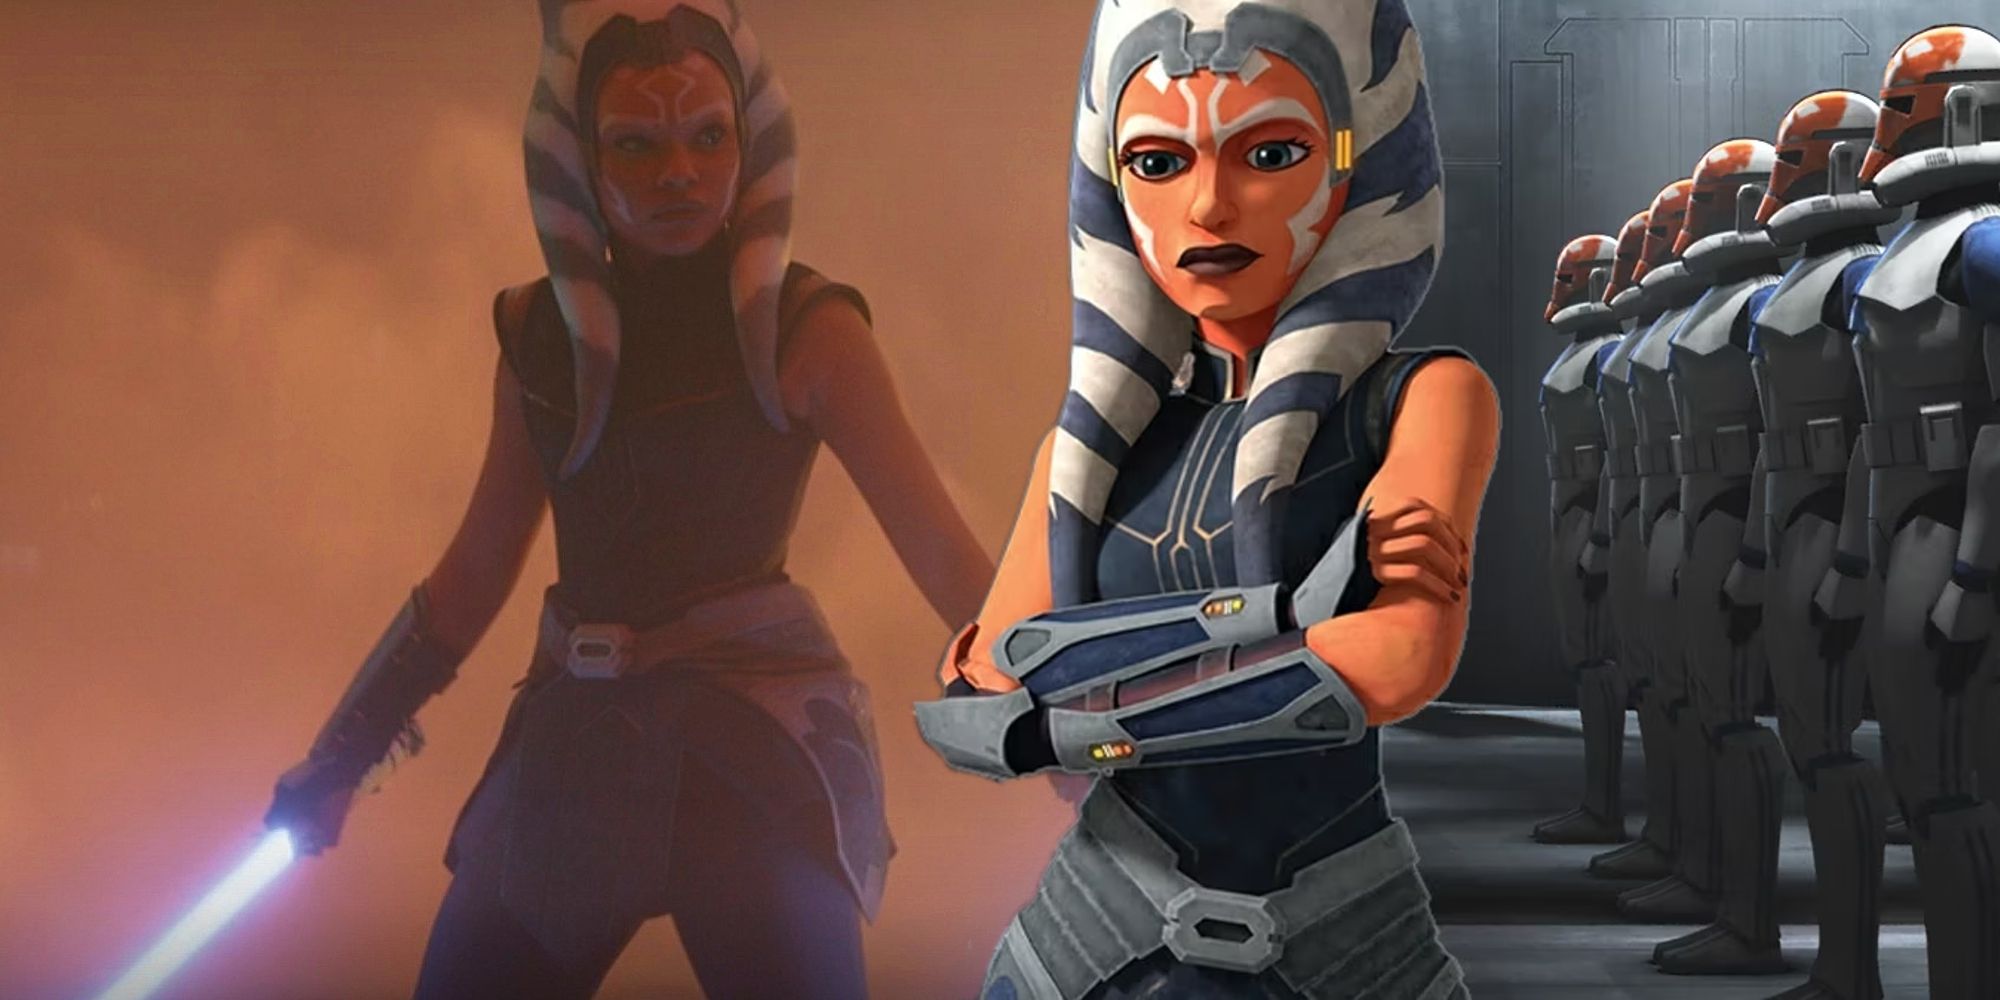 Amazing Clone Wars Comparisons Show How Good Star Wars’ Live-Action Young Ahsoka Really Is